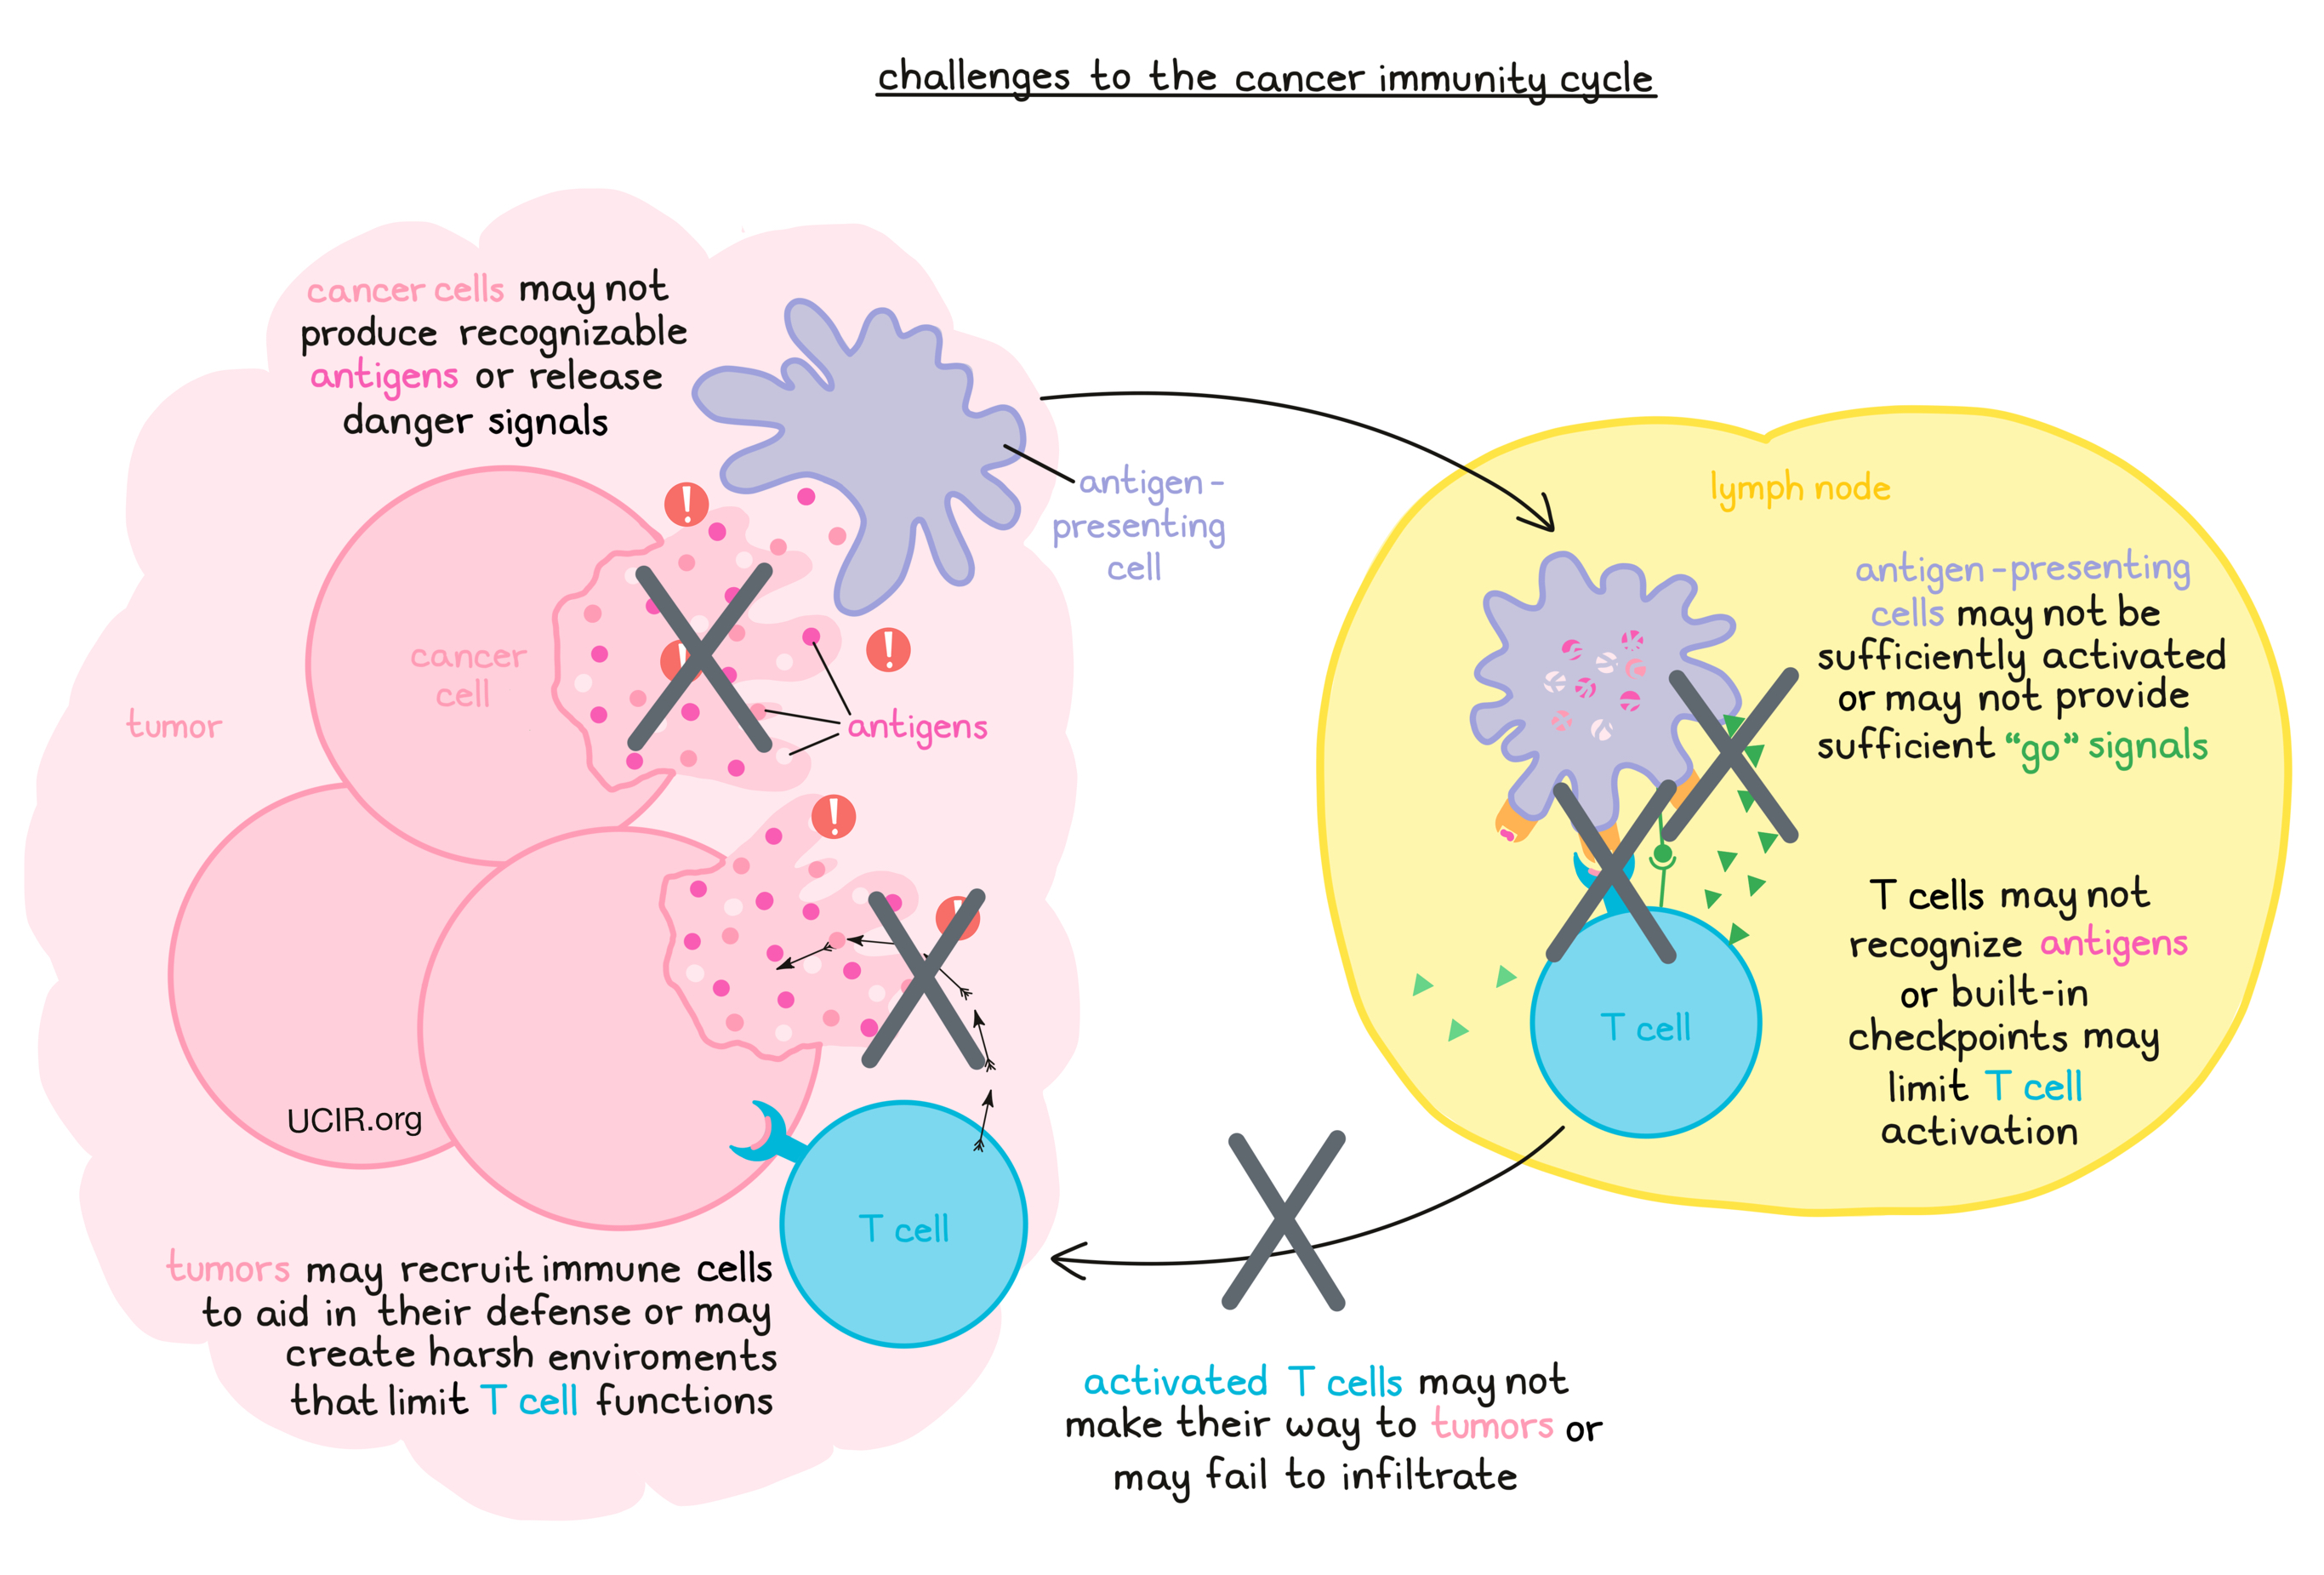 How cancer evades immune system detection and spreads